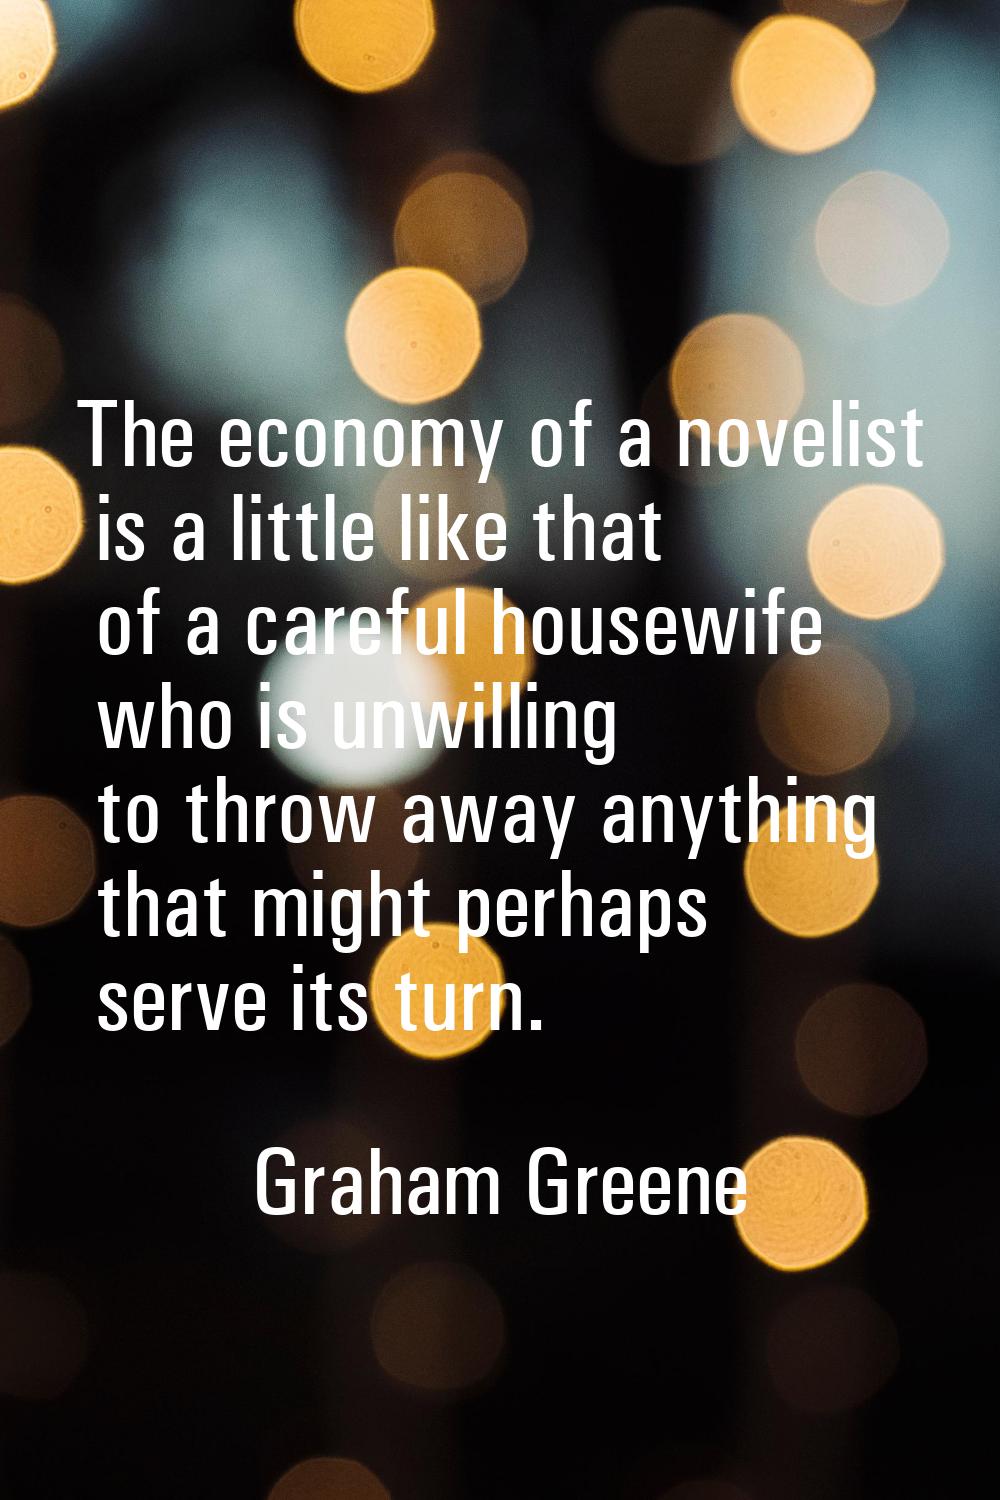 The economy of a novelist is a little like that of a careful housewife who is unwilling to throw aw